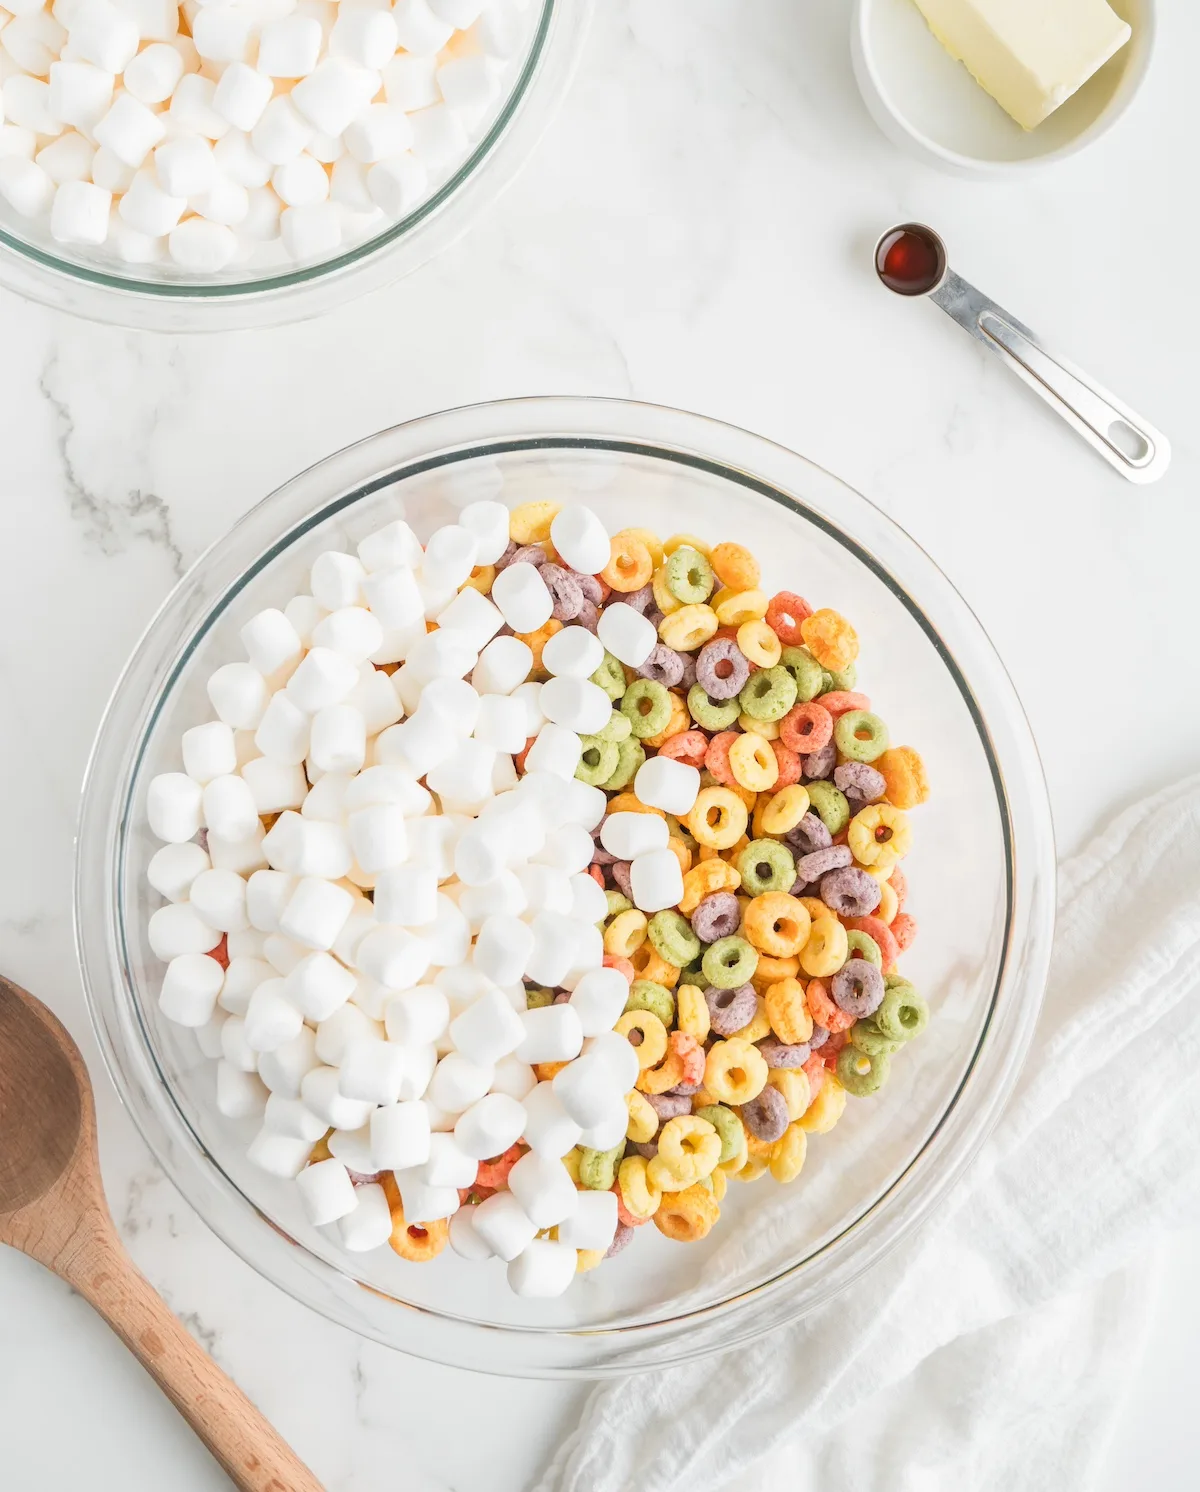 Mixing Fruit loops and marshmallows